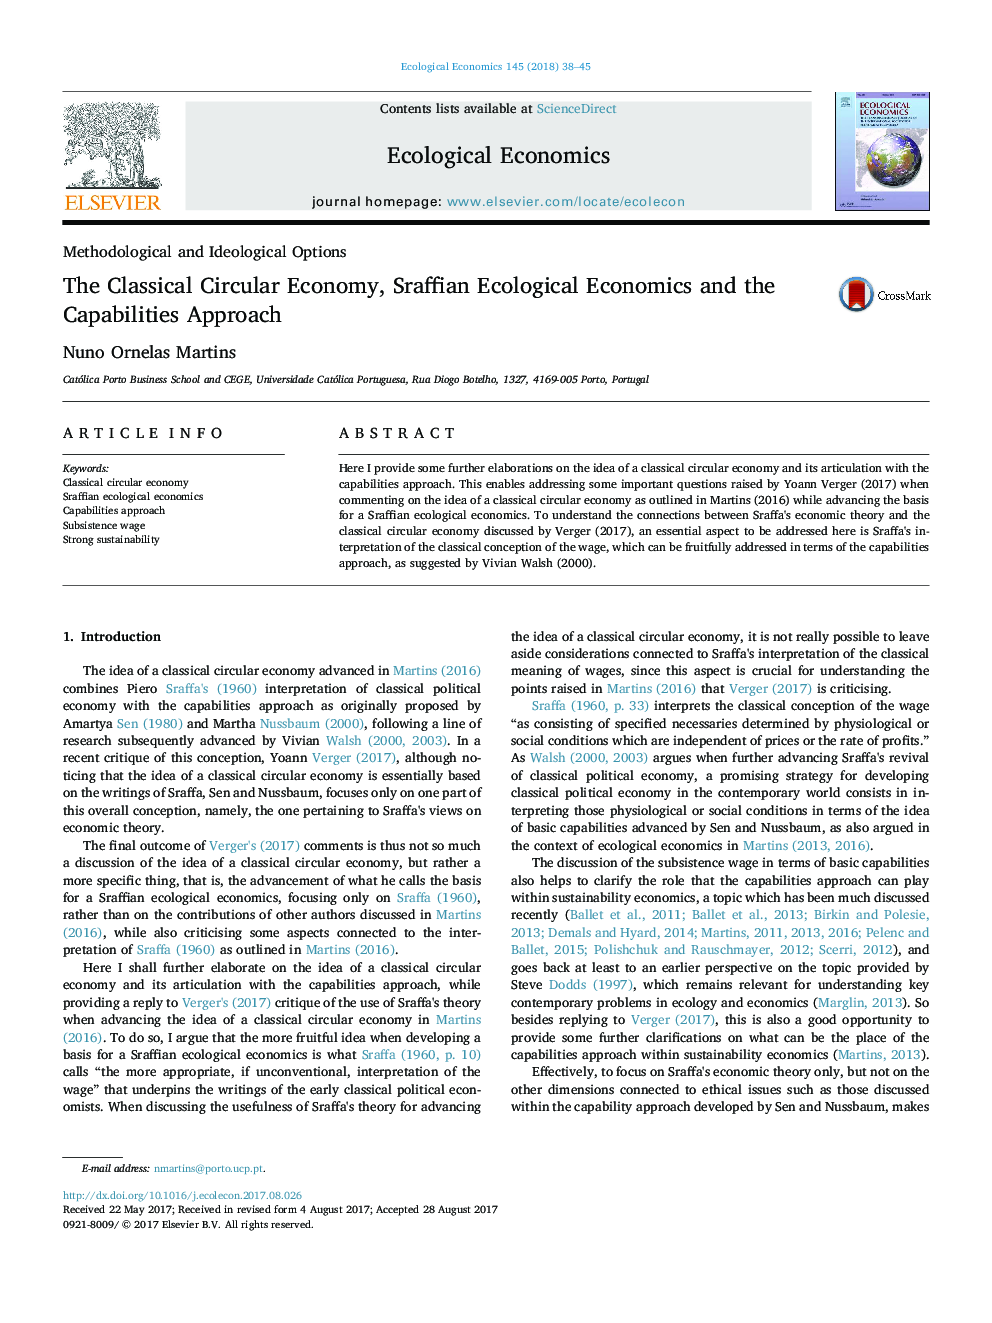 The Classical Circular Economy, Sraffian Ecological Economics and the Capabilities Approach